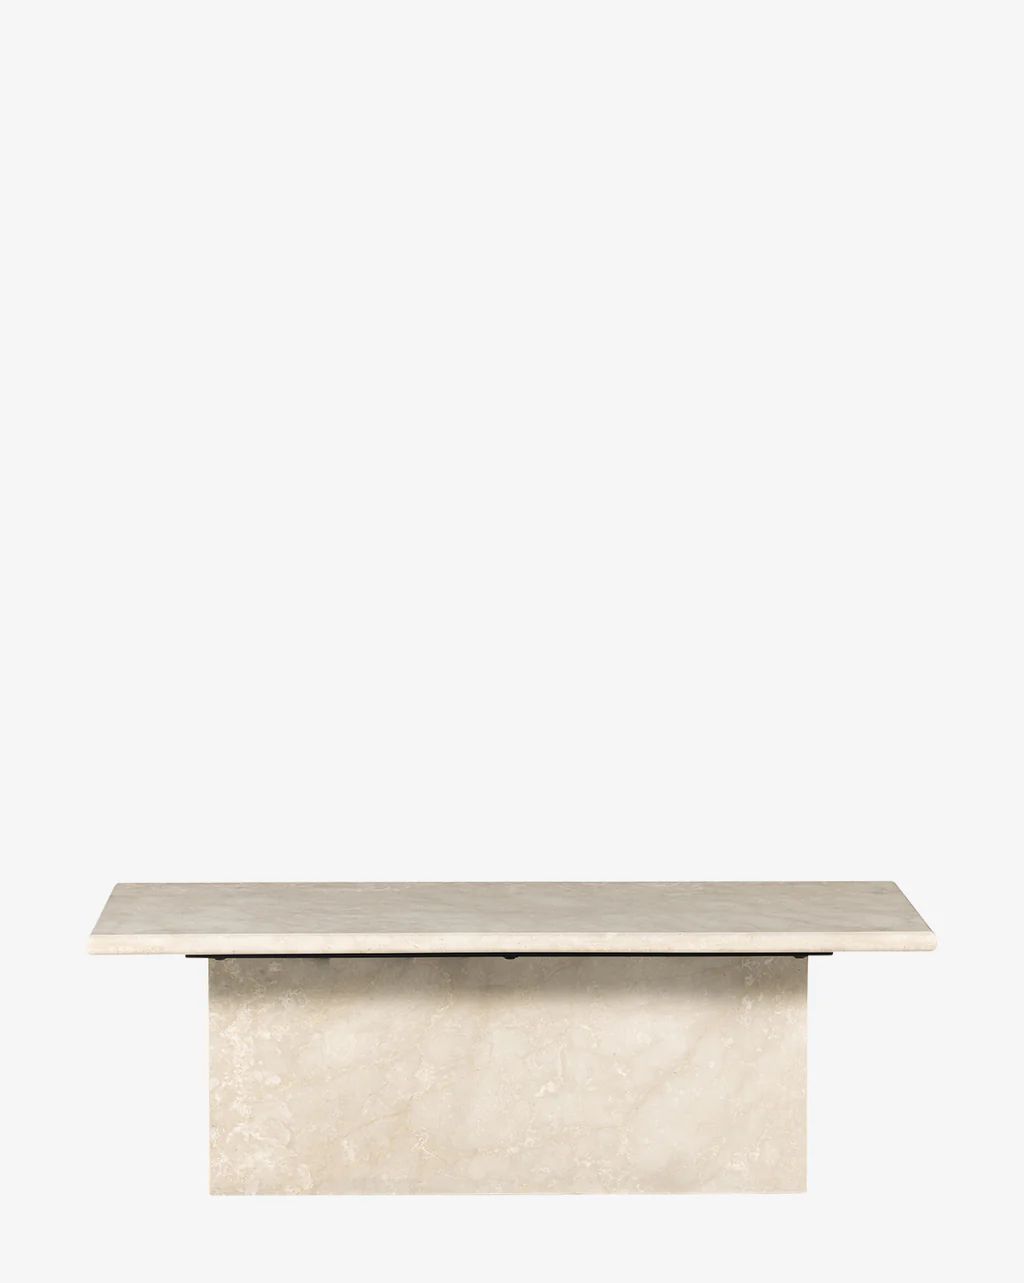 Embry Coffee Table | McGee & Co.